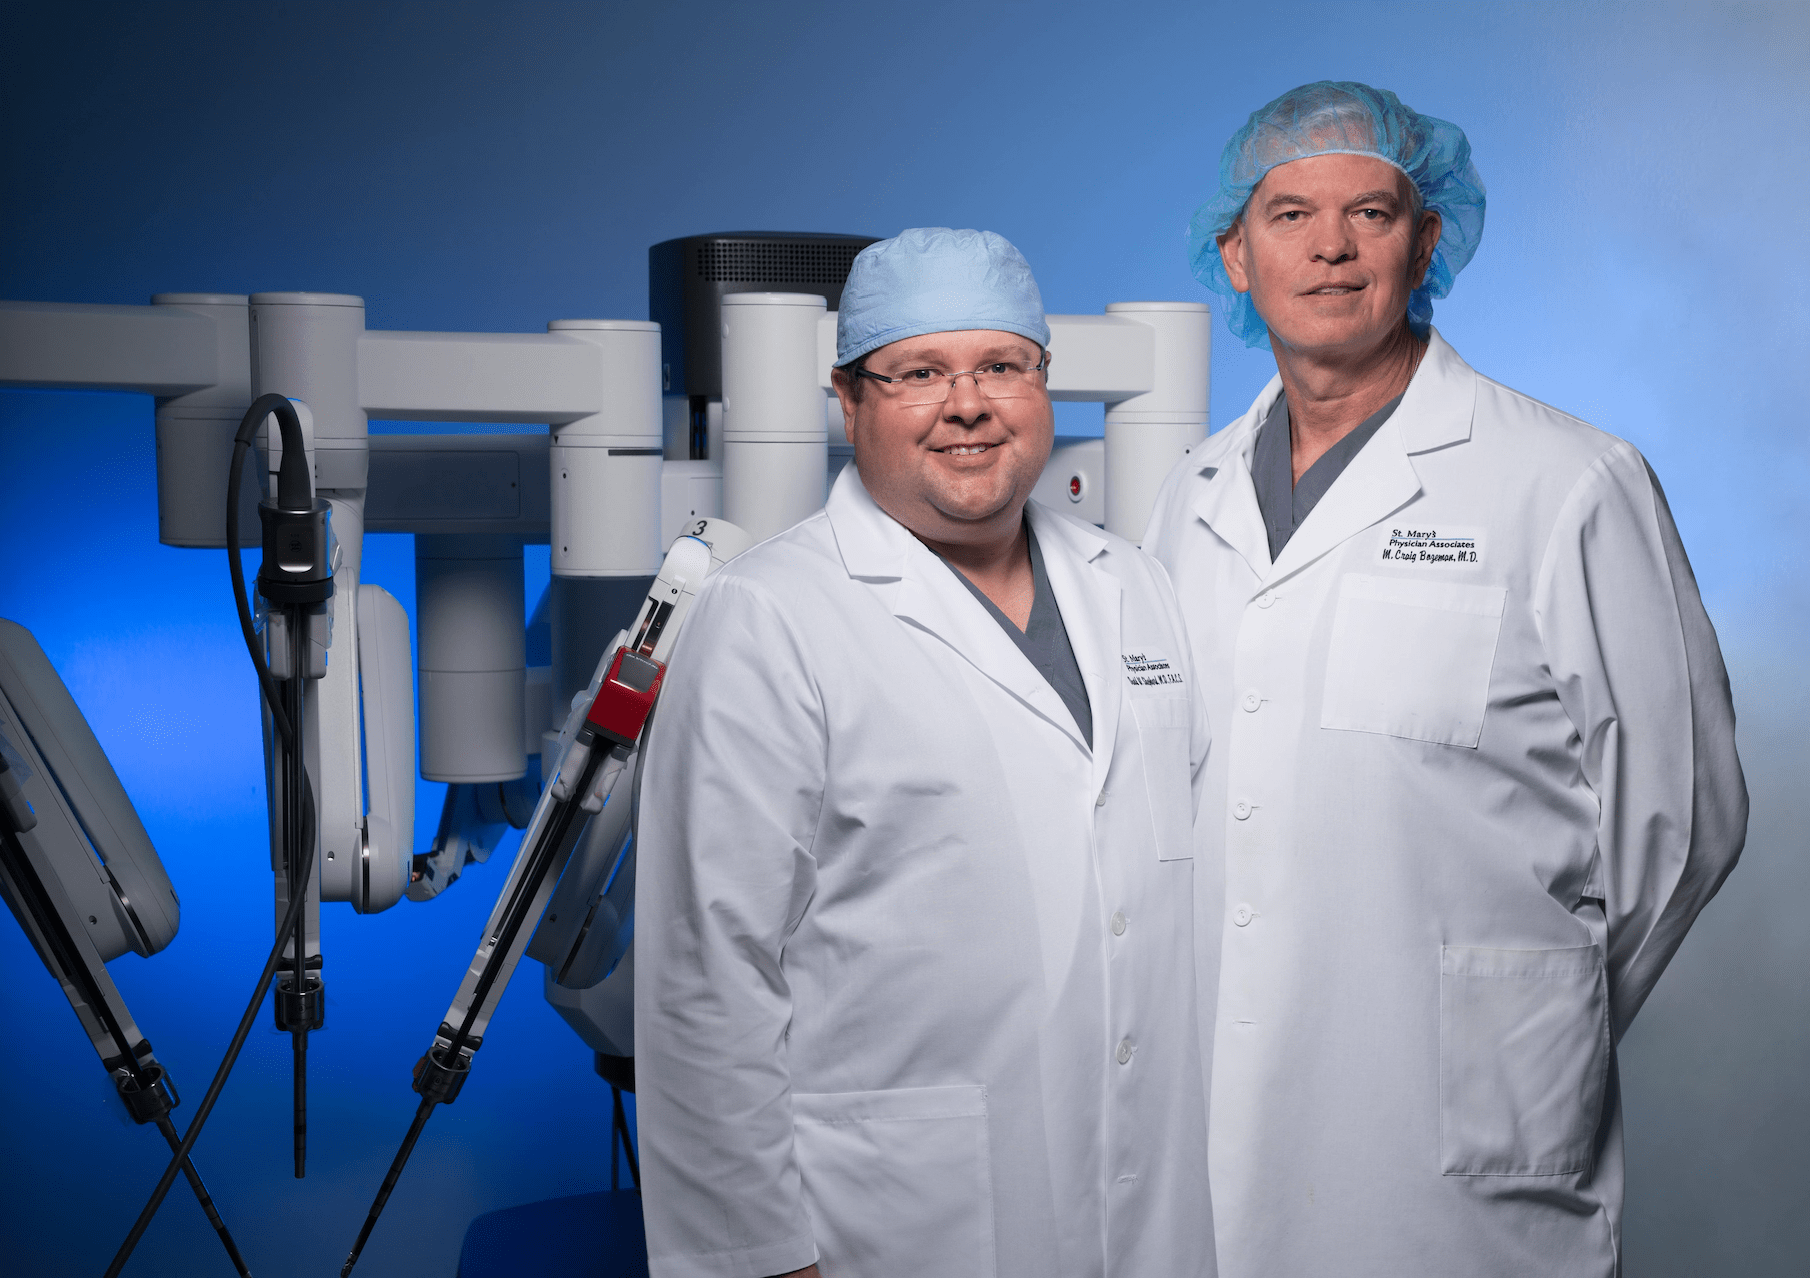 Dr. Bozeman and Dr. Shepard standing in front of robotic-assisted surgery tools